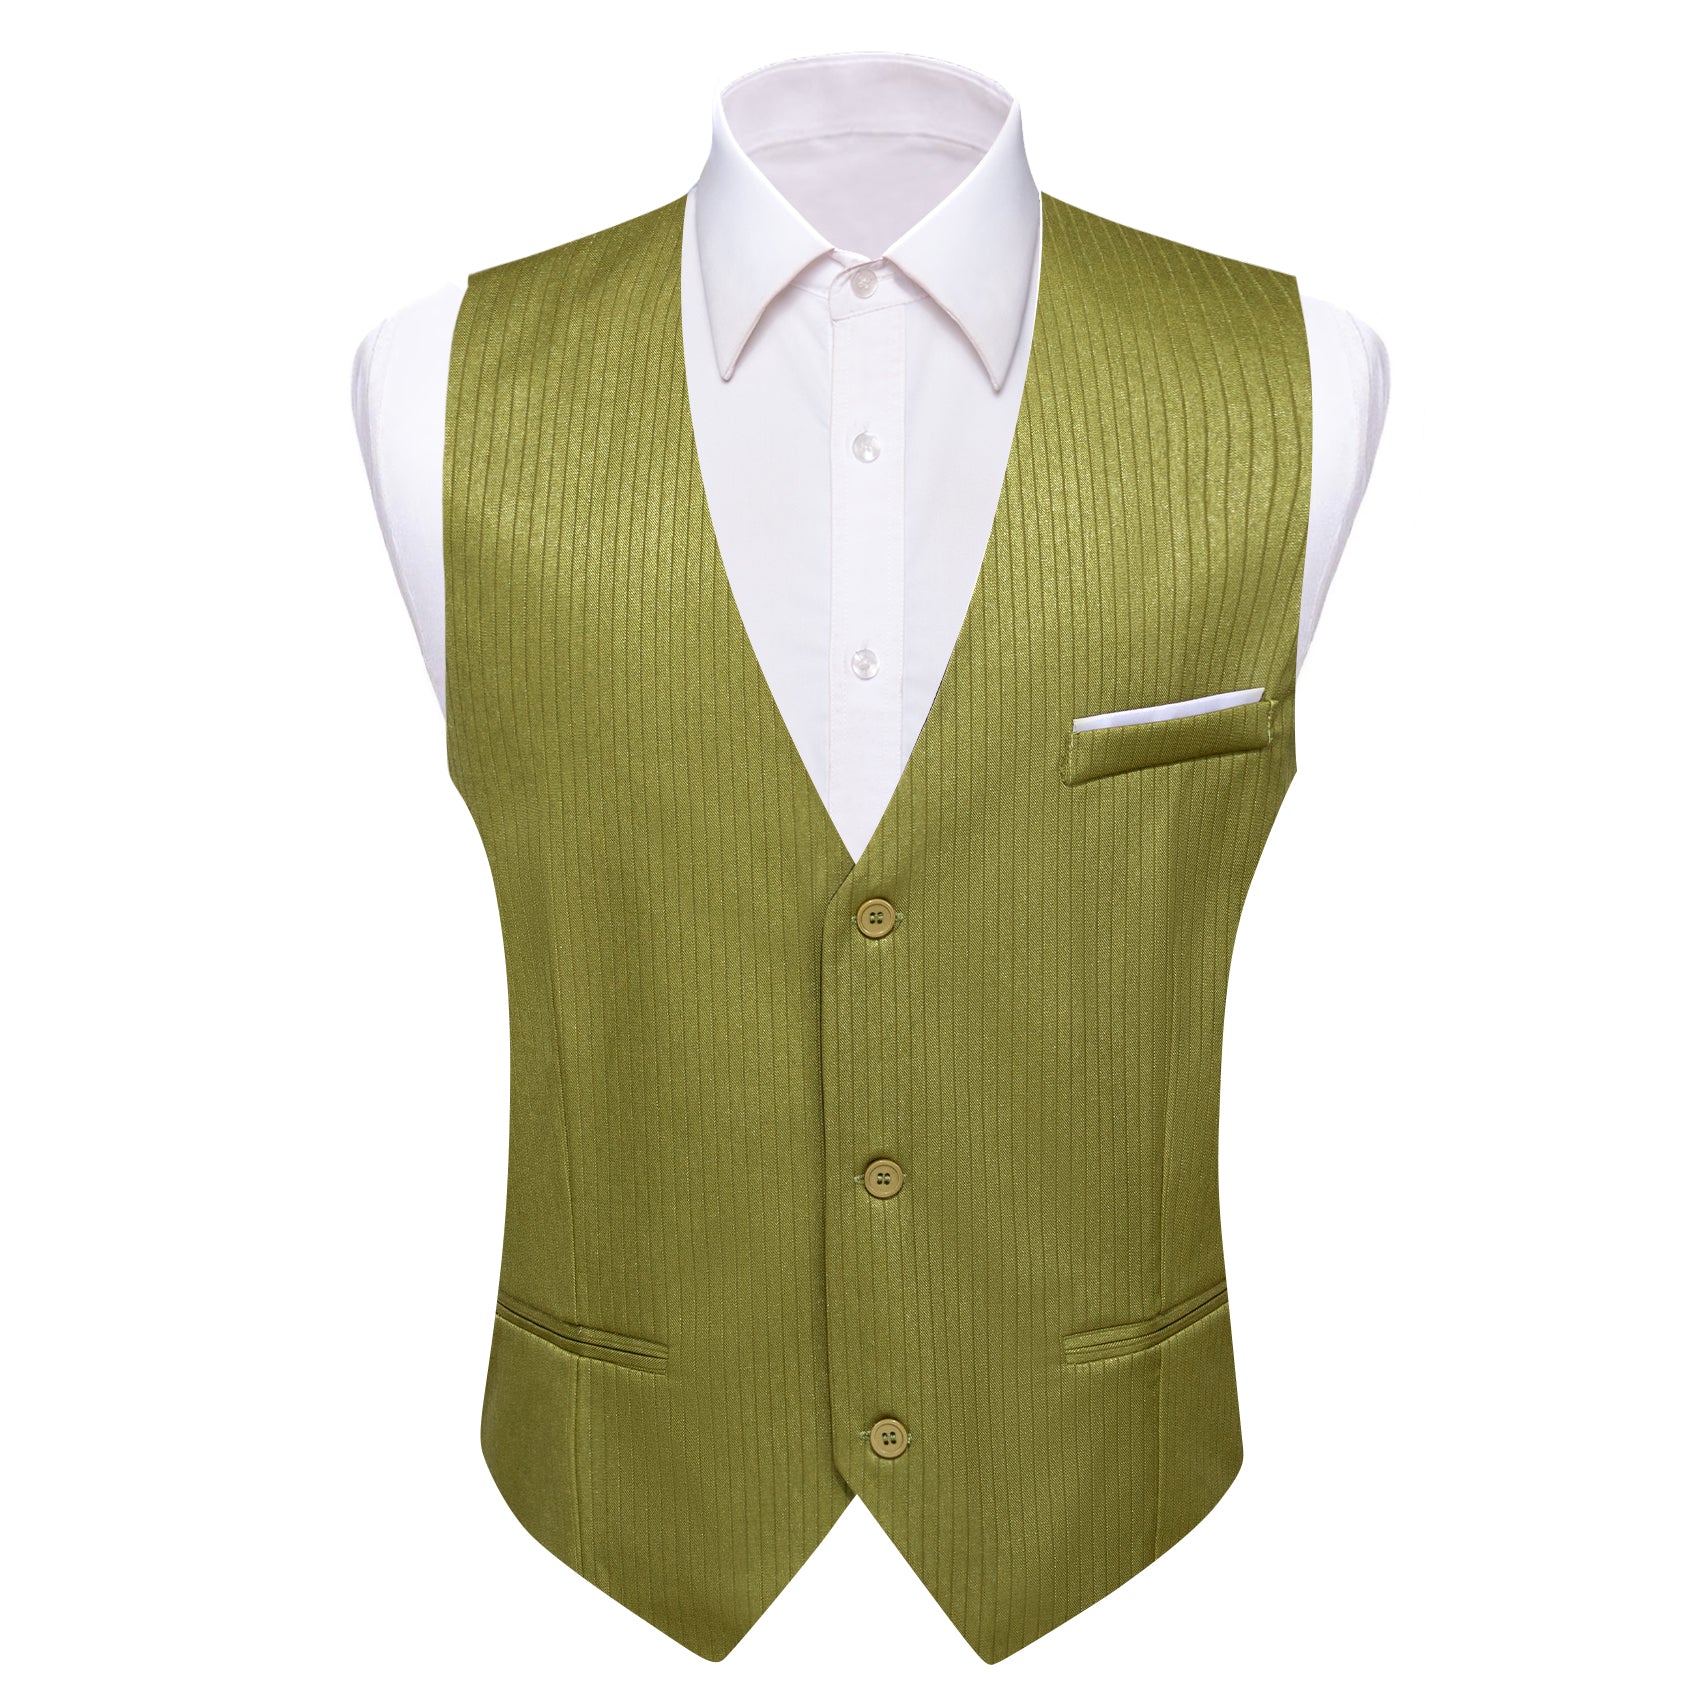 Barry.wang Olive Green Solid Business Vest Suit